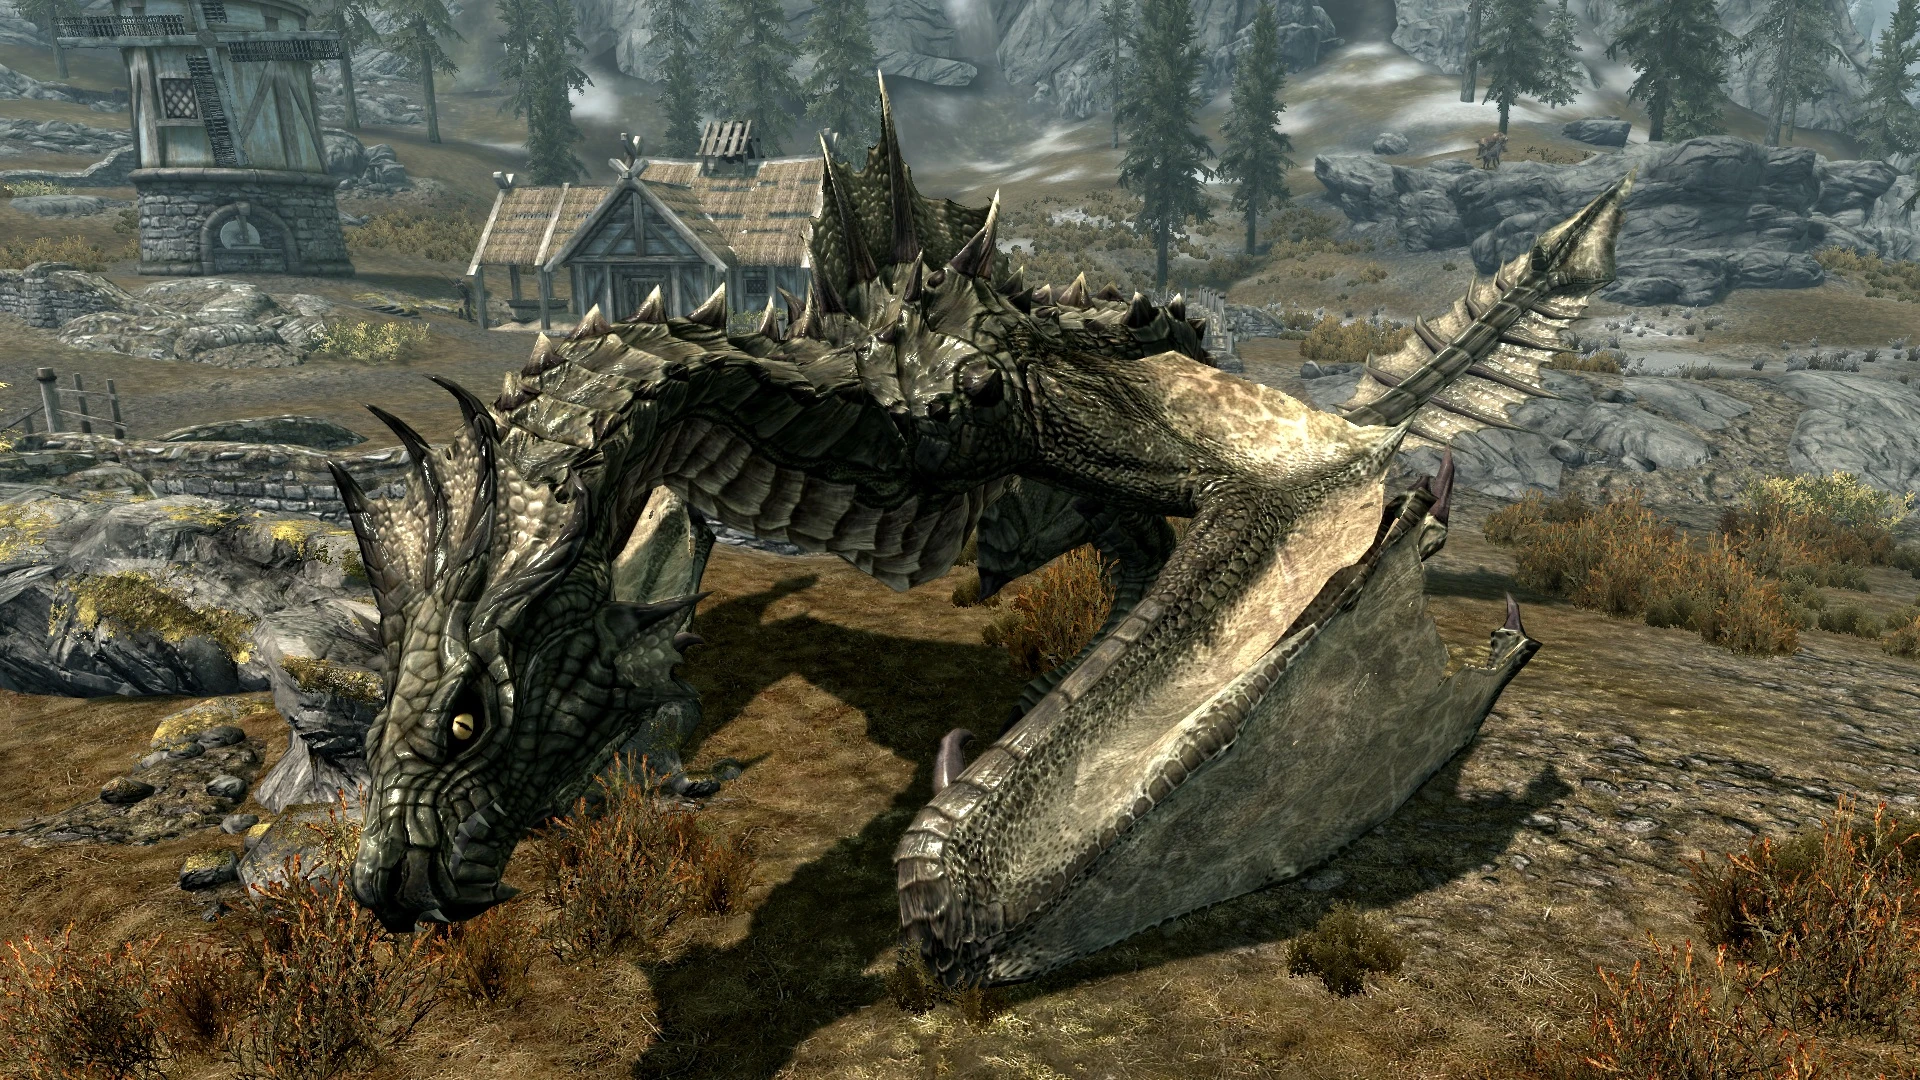 bellyaches hd dragon replacer pack at skyrim nexus mods and community.